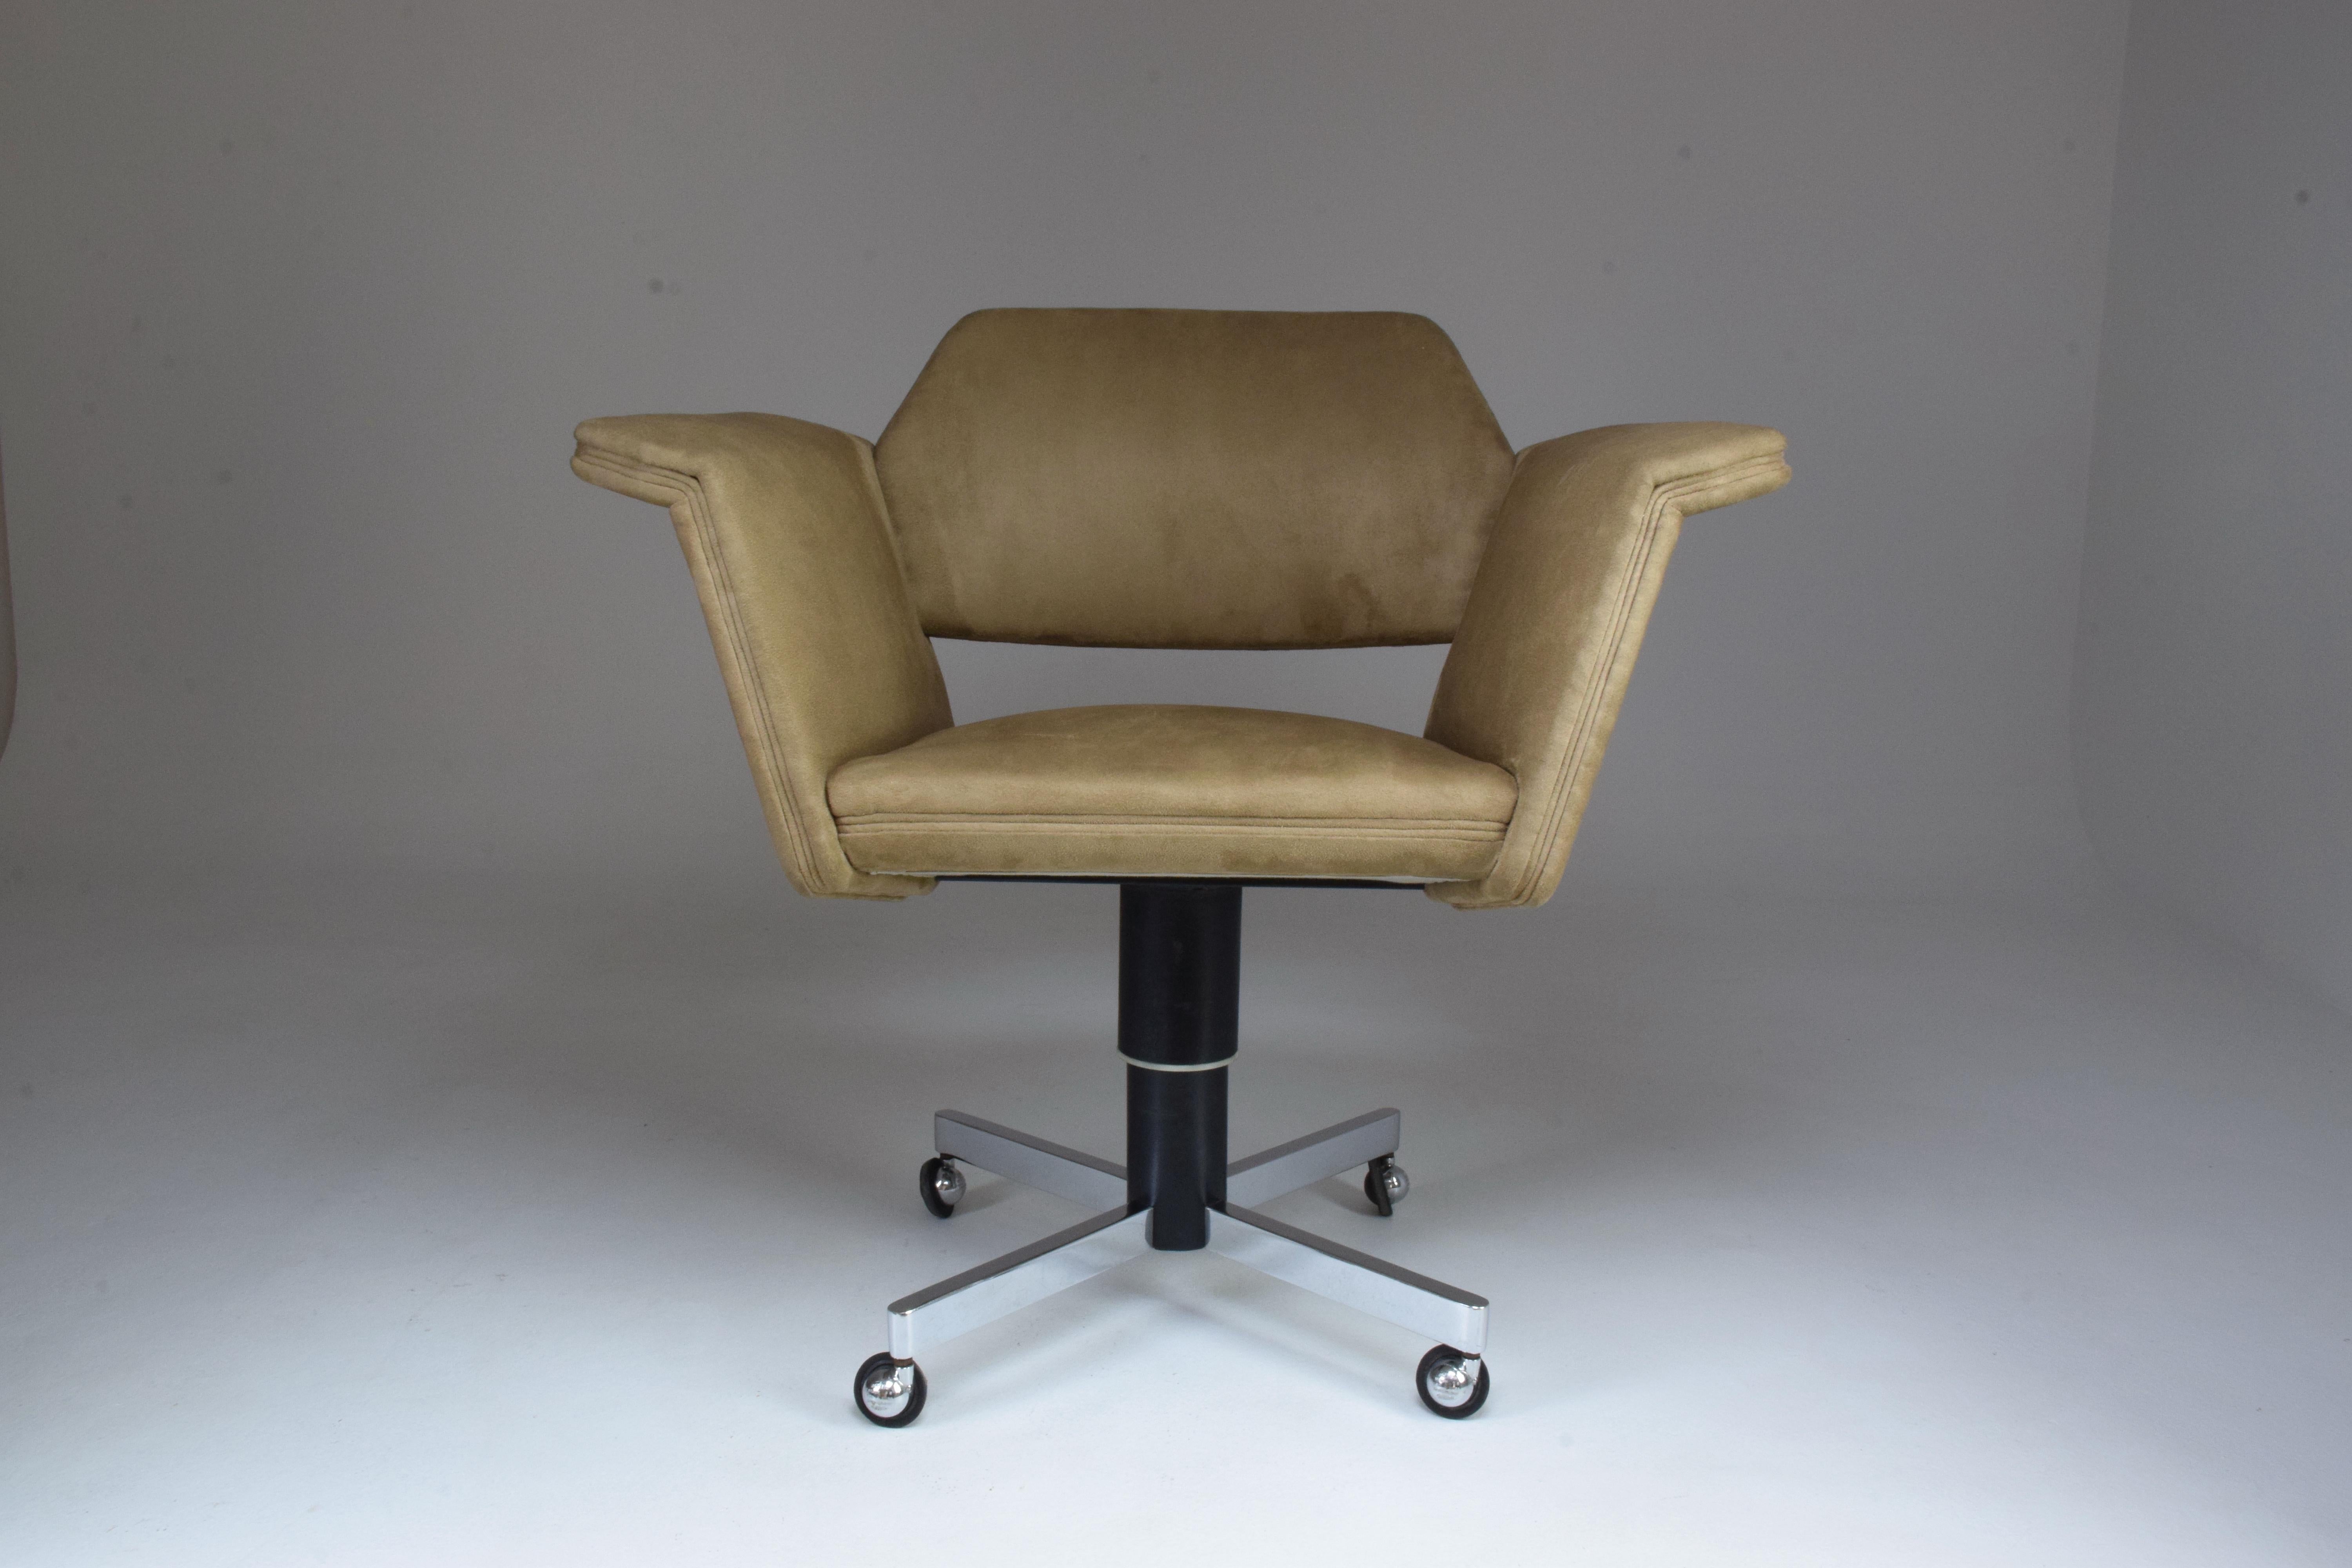 A Mid-Century Modernist wingback office or desk chair with a steel structure and rollers designed by one of the most influential French designers of the 20th century.
In fully restored condition Steiner edition, circa 1950s.

------
All our pieces